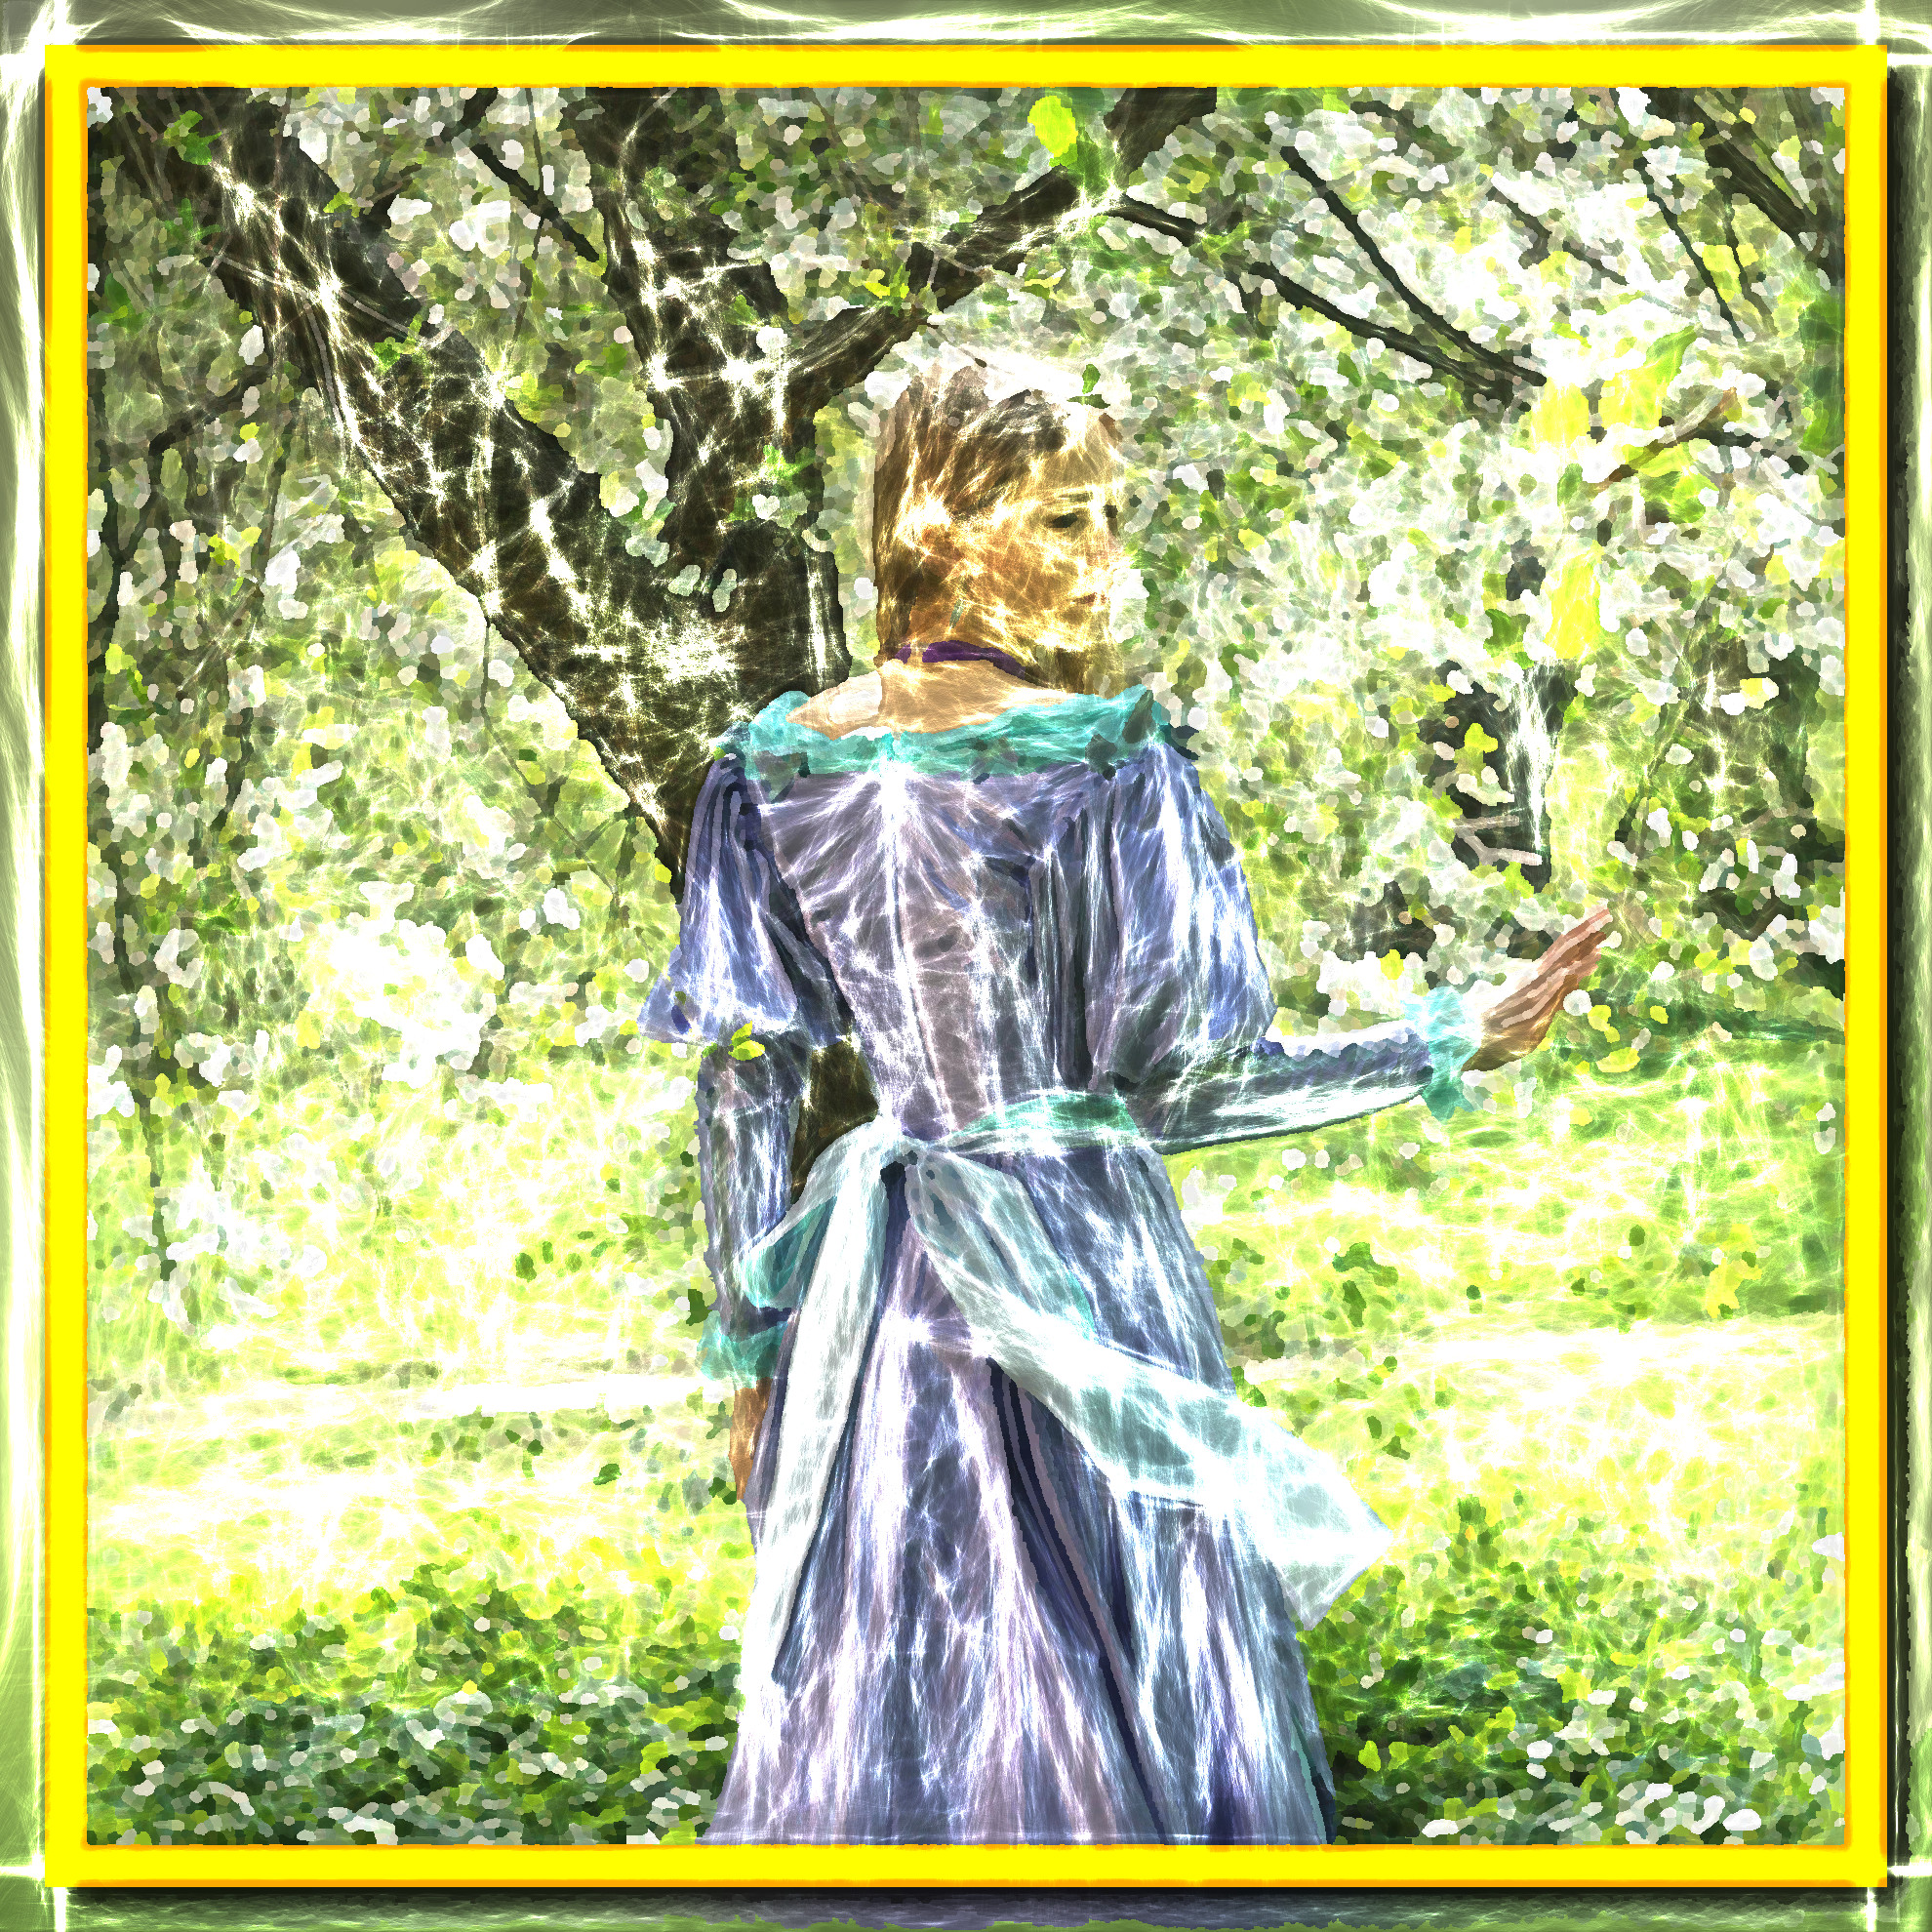 2023-05-28 08-46-40costume__spring_aquarell__stock_image_by_aquilina108_dcb2hdt-fullview_portrait with a framed Artistic effect, style Ghost.jpg